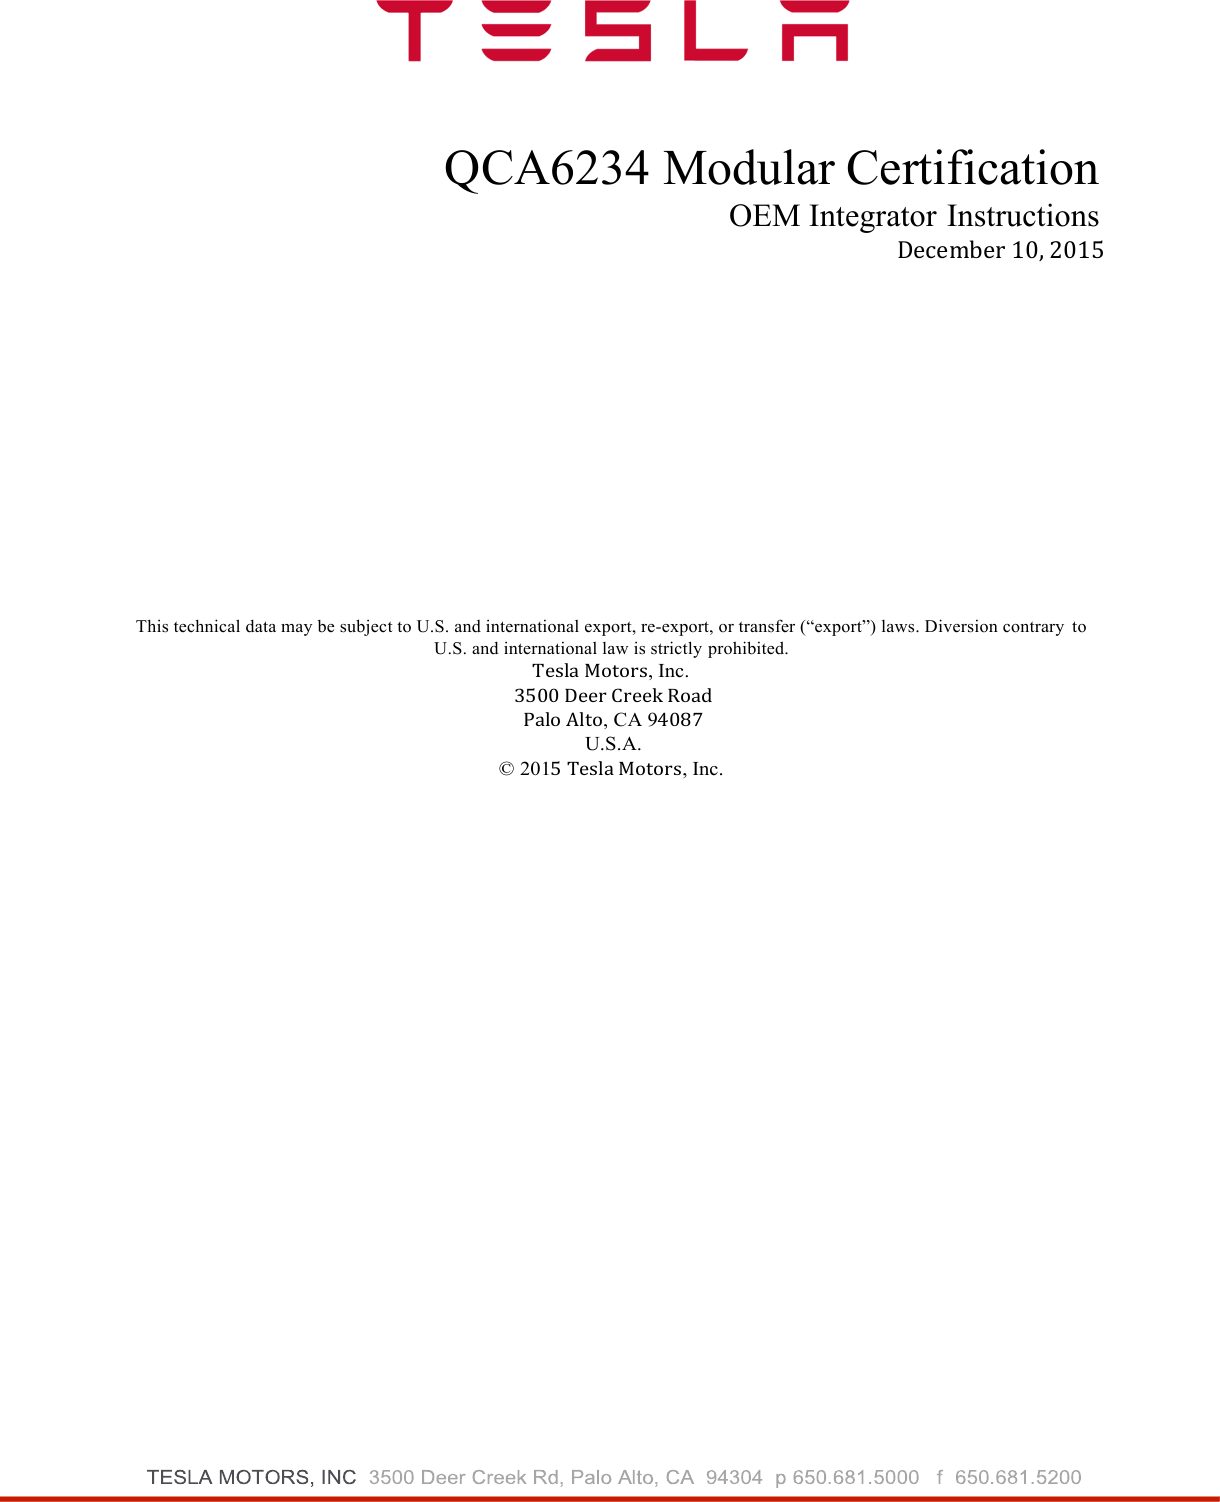  QCA6234 Modular Certification OEM Integrator Instructions December 10, 2015  This technical data may be subject to U.S. and international export, re-export, or transfer (“export”) laws. Diversion contrary to U.S. and international law is strictly prohibited. Tesla Motors, Inc. 3500 Deer Creek Road Palo Alto, CA 94087 U.S.A. © 2015 Tesla Motors, Inc.  